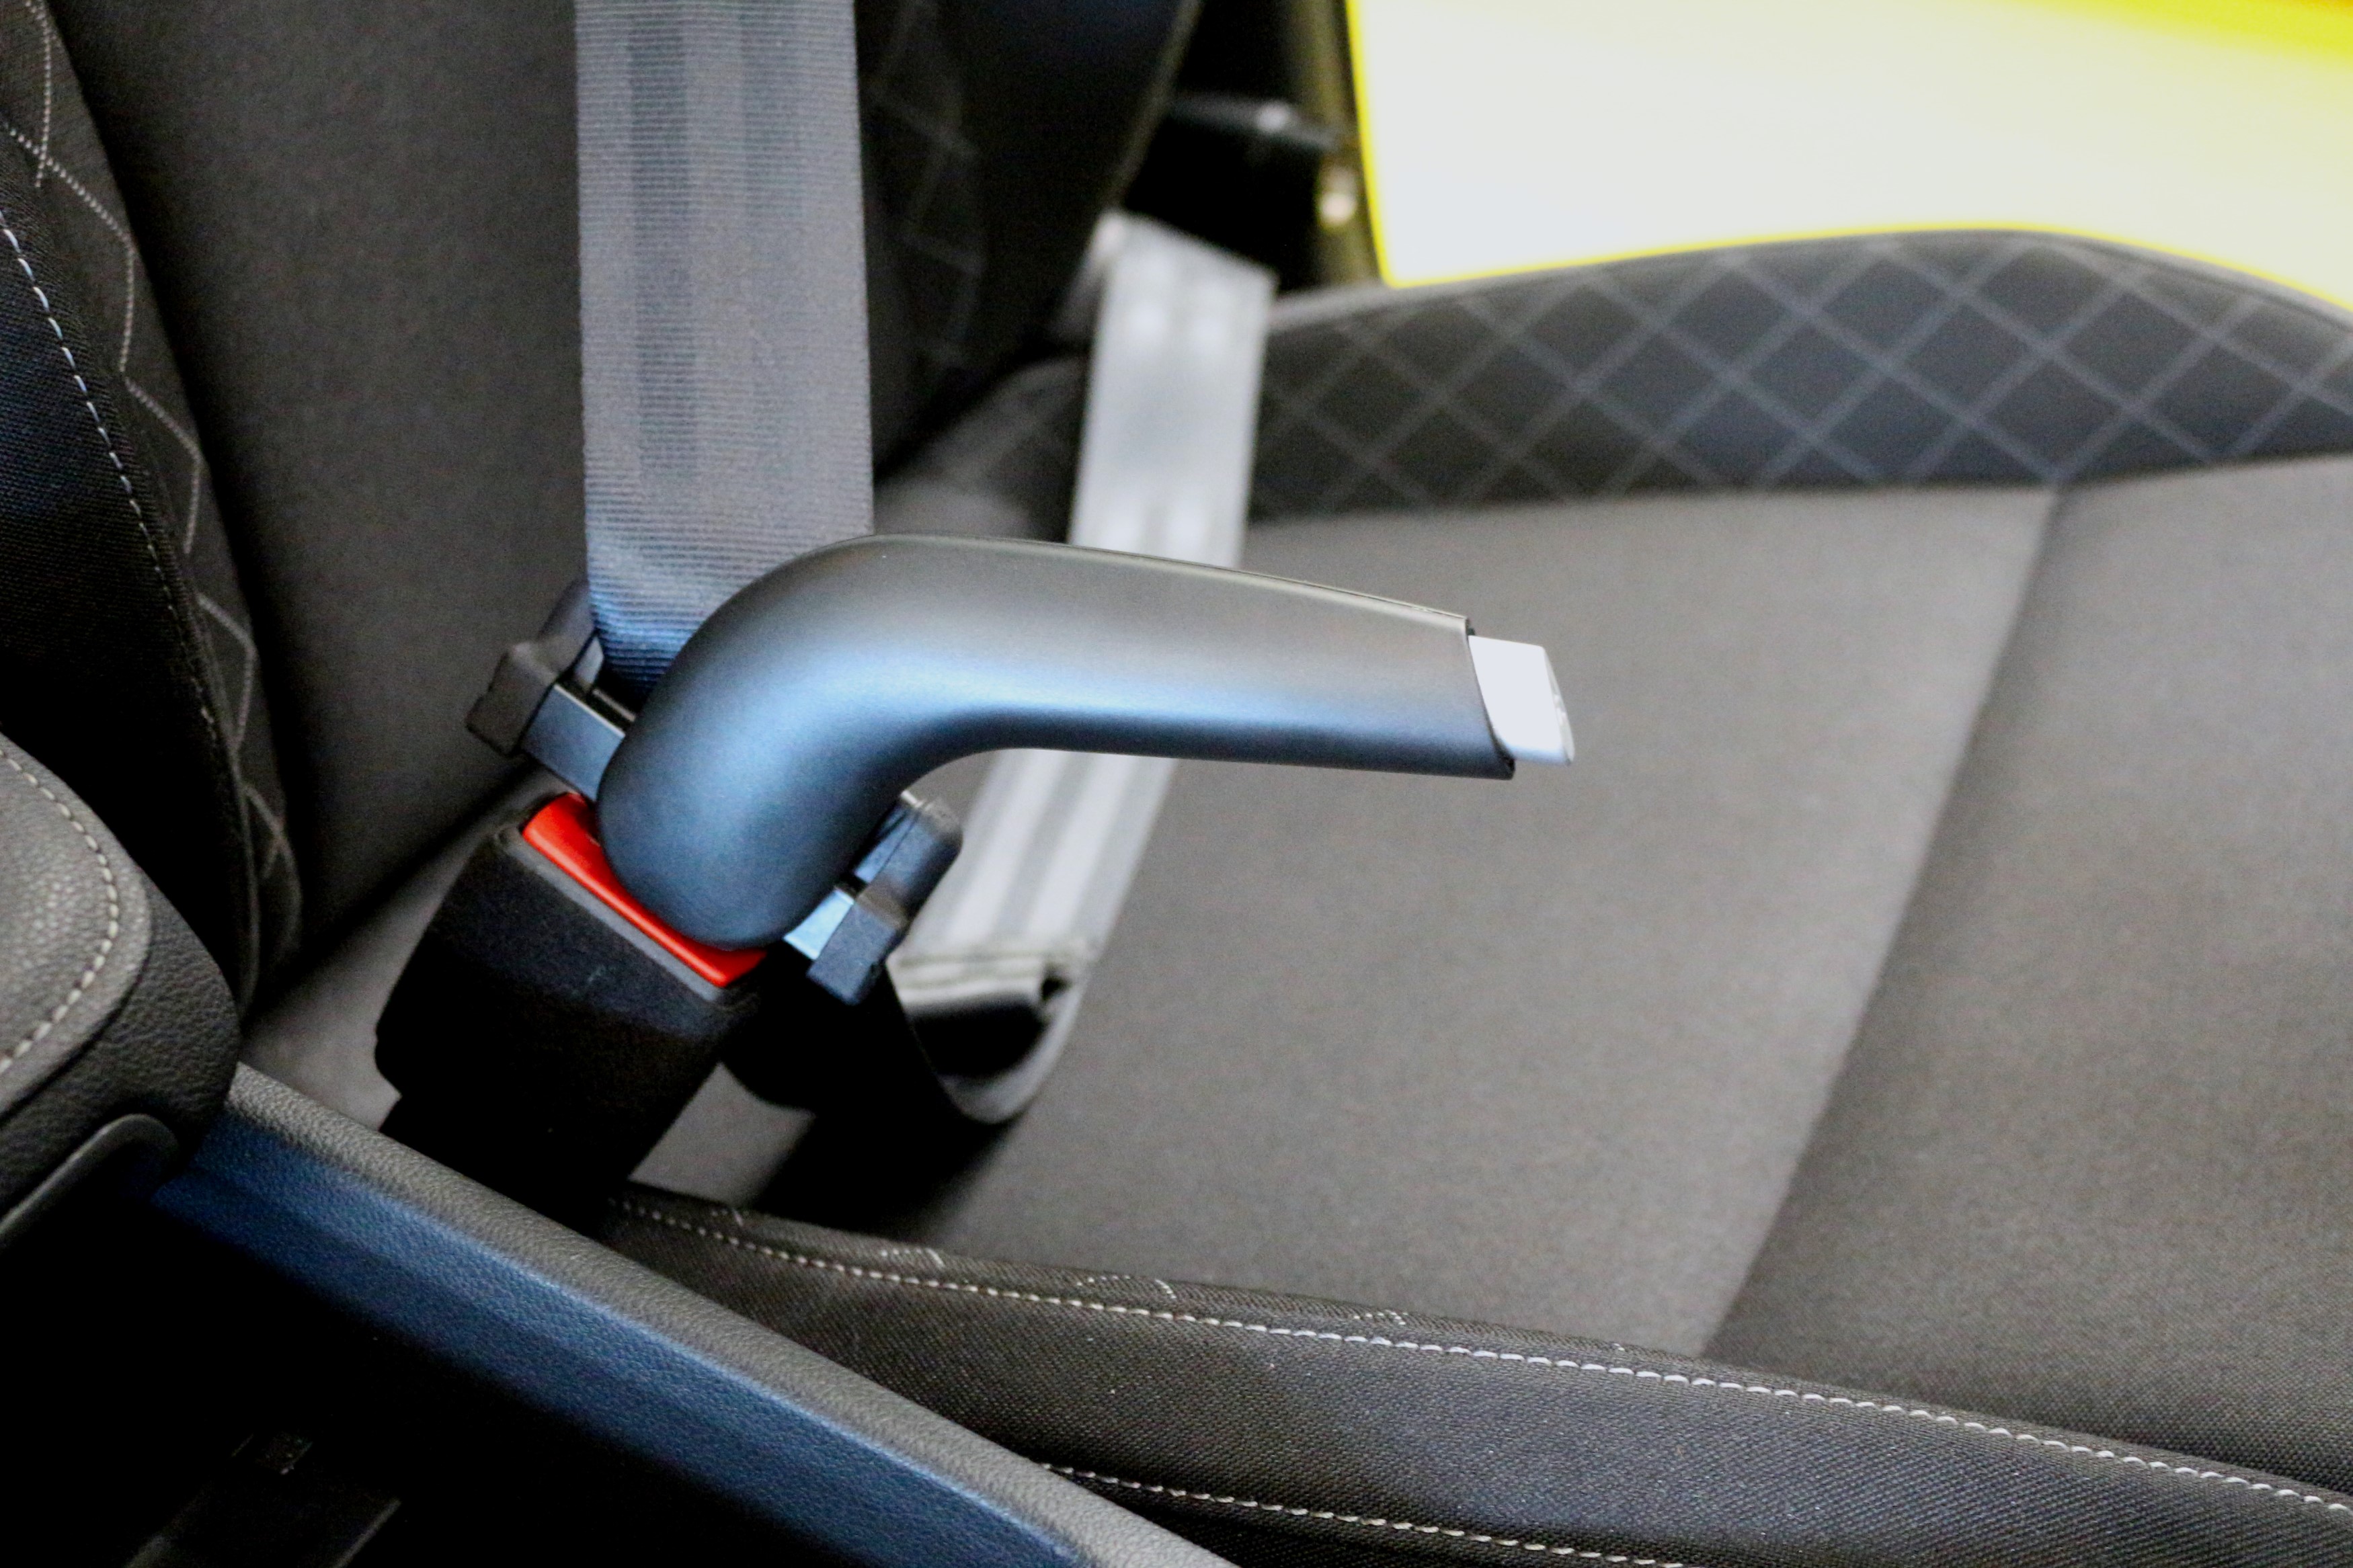 The JIMMY by Veigel is a seat buckle assist device designed to aid drivers with buckling and unbuckling the seat belt buckle in an automobile.